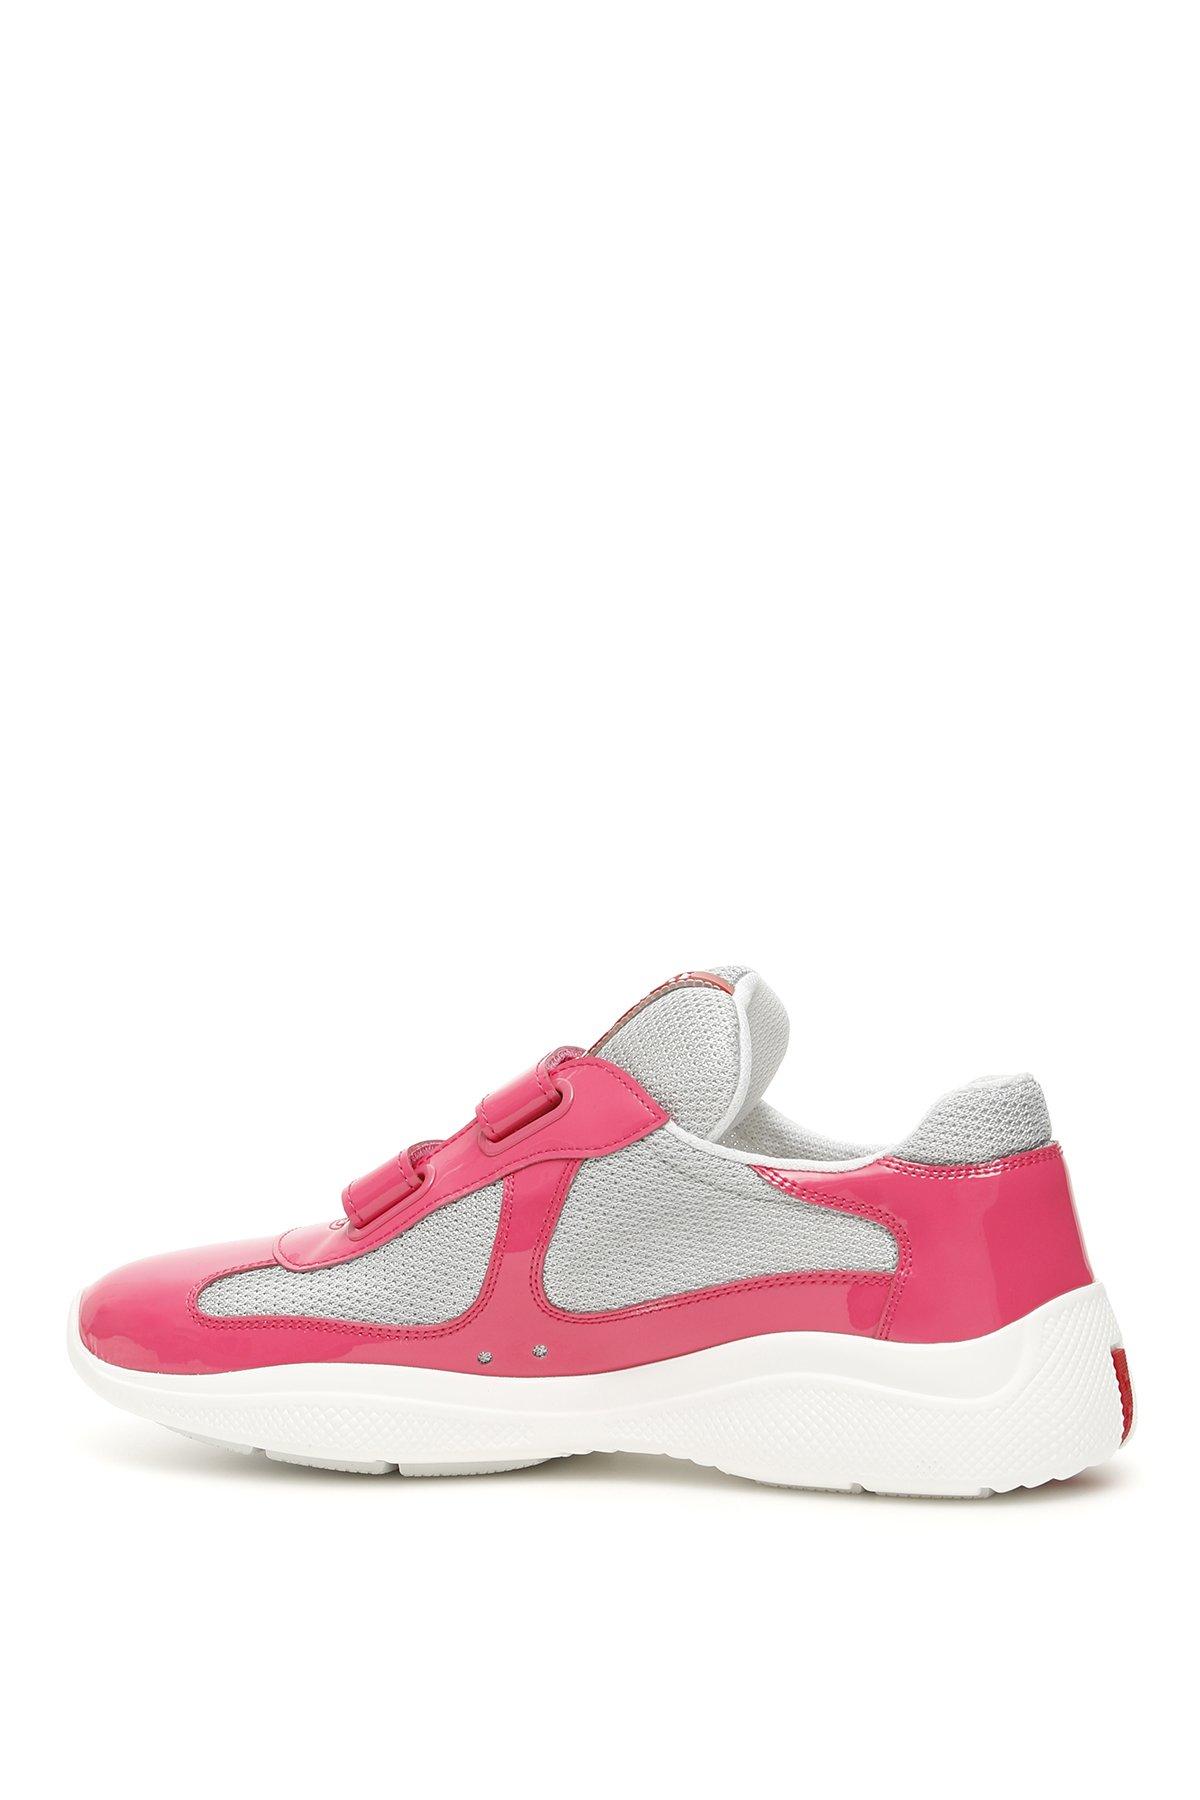 Prada Velcro Strap Contrasting Panelled Sneakers in Pink | Lyst